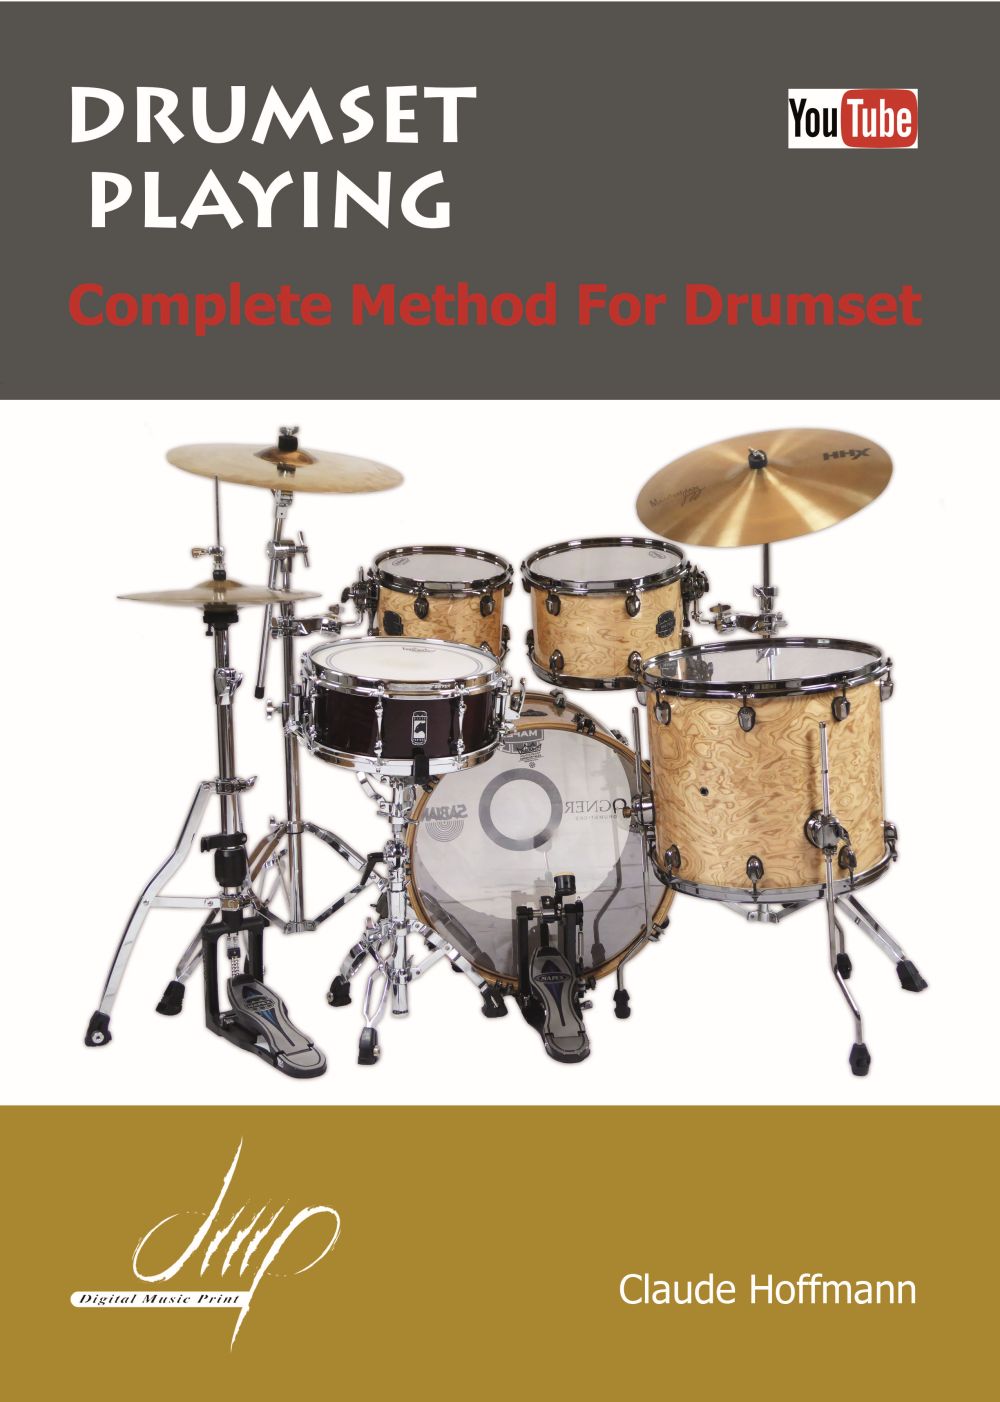 Drumset Playing: Complete Method (HOFFMANN CLAUDE)